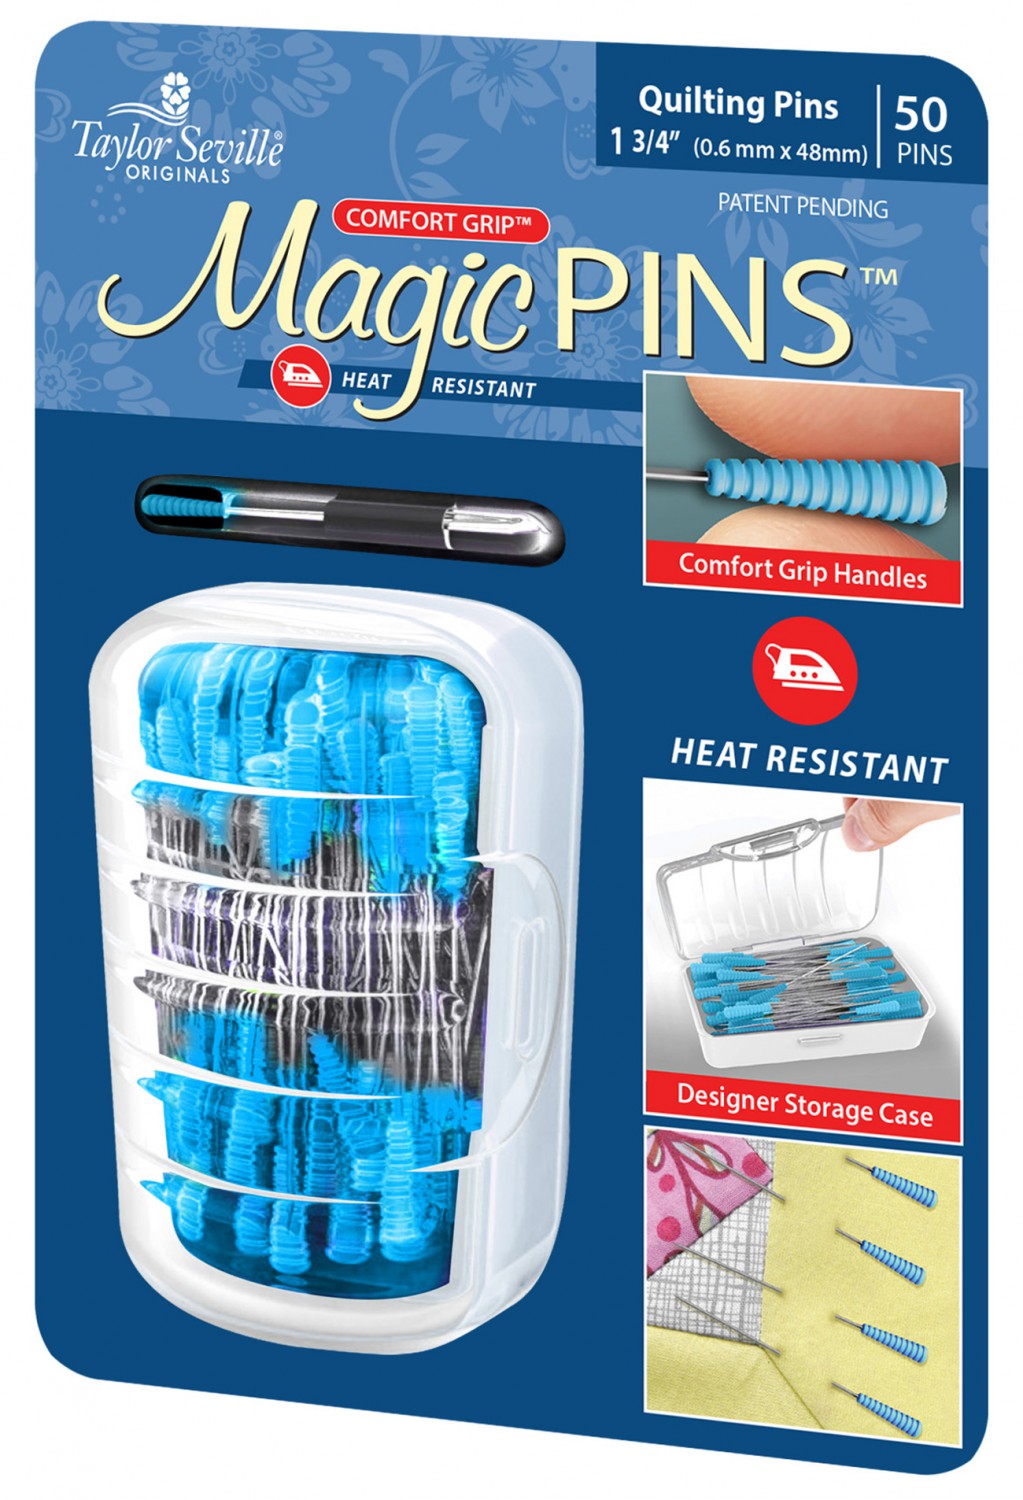 Magic Pins Quilting Fine (50) by Taylor Seville